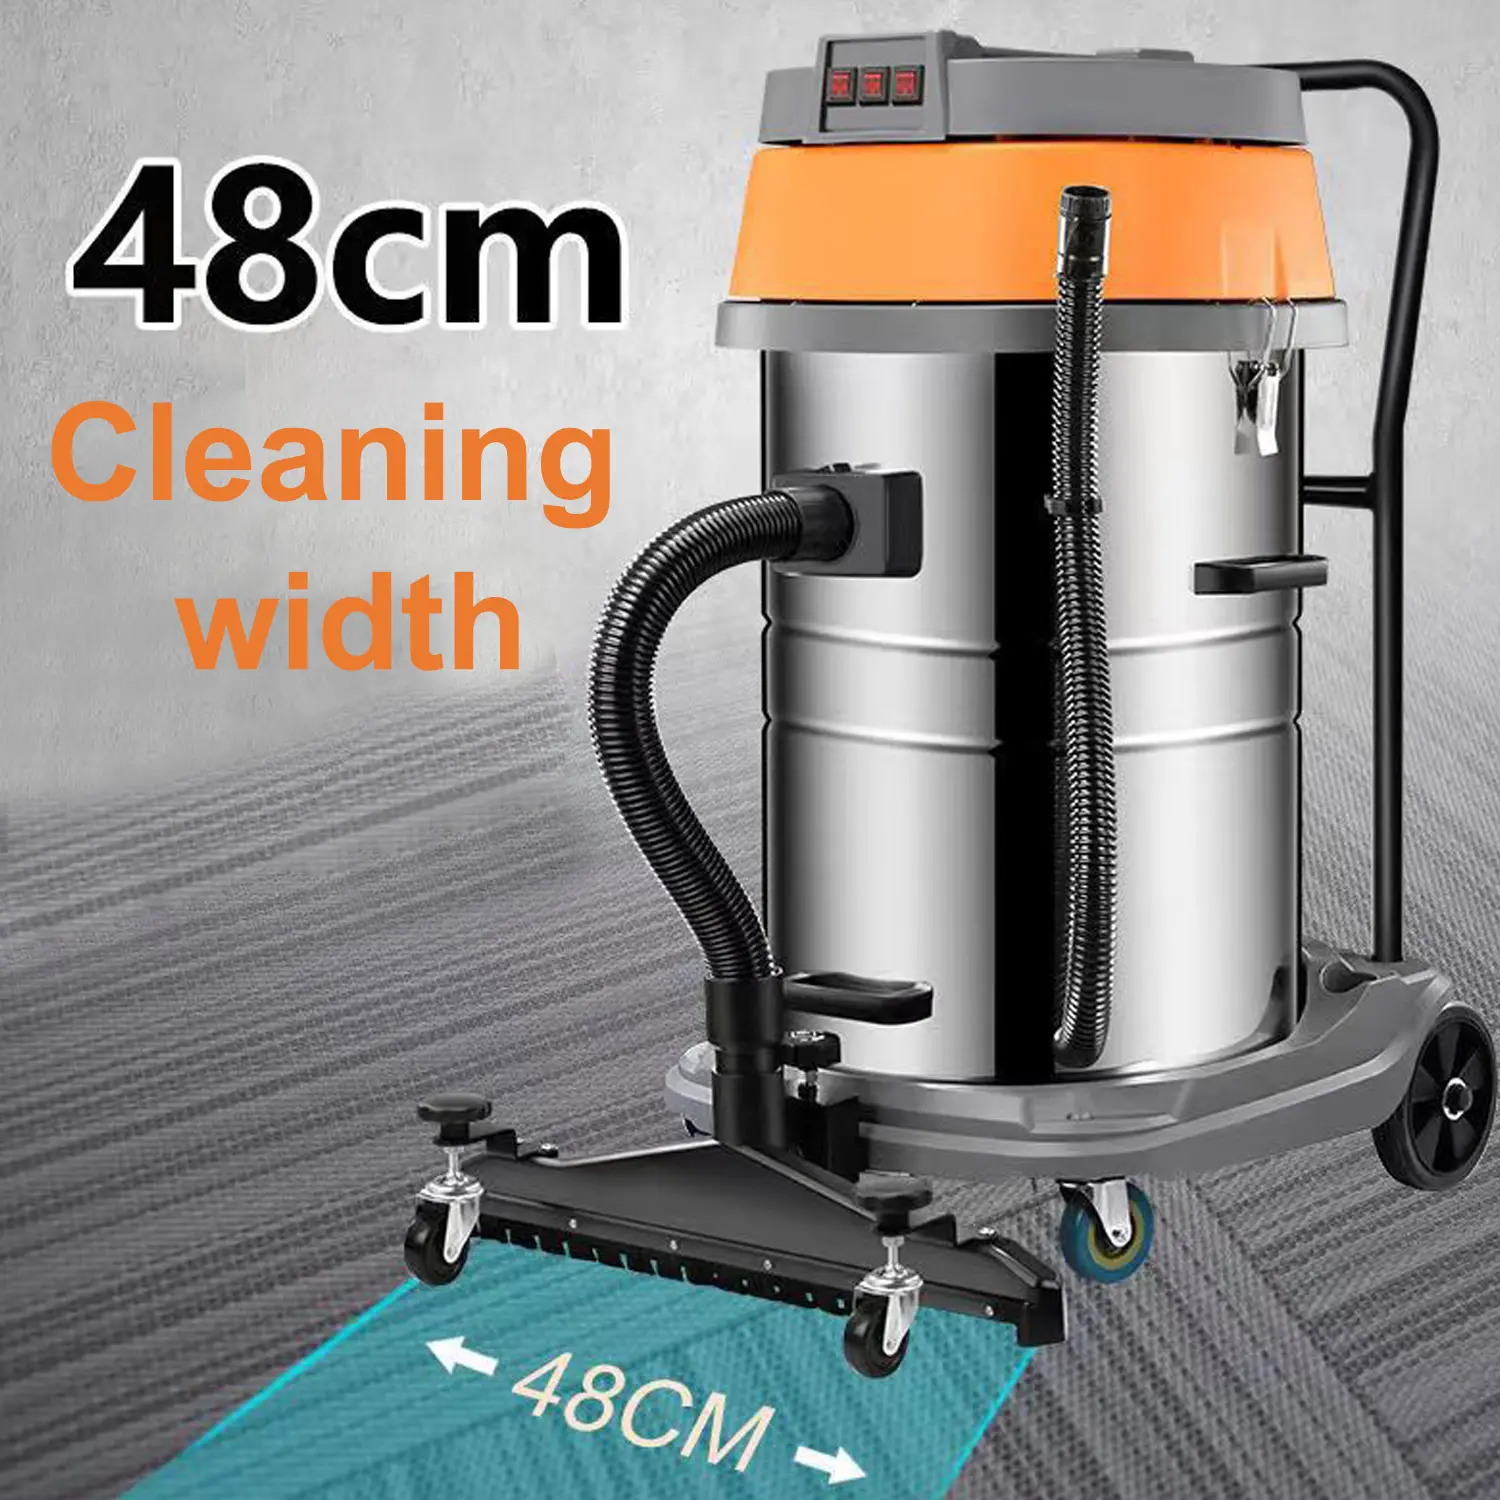 EVEAGE Wet Dry Dust Extractor Vacuum Industrial Collector Stainless steel